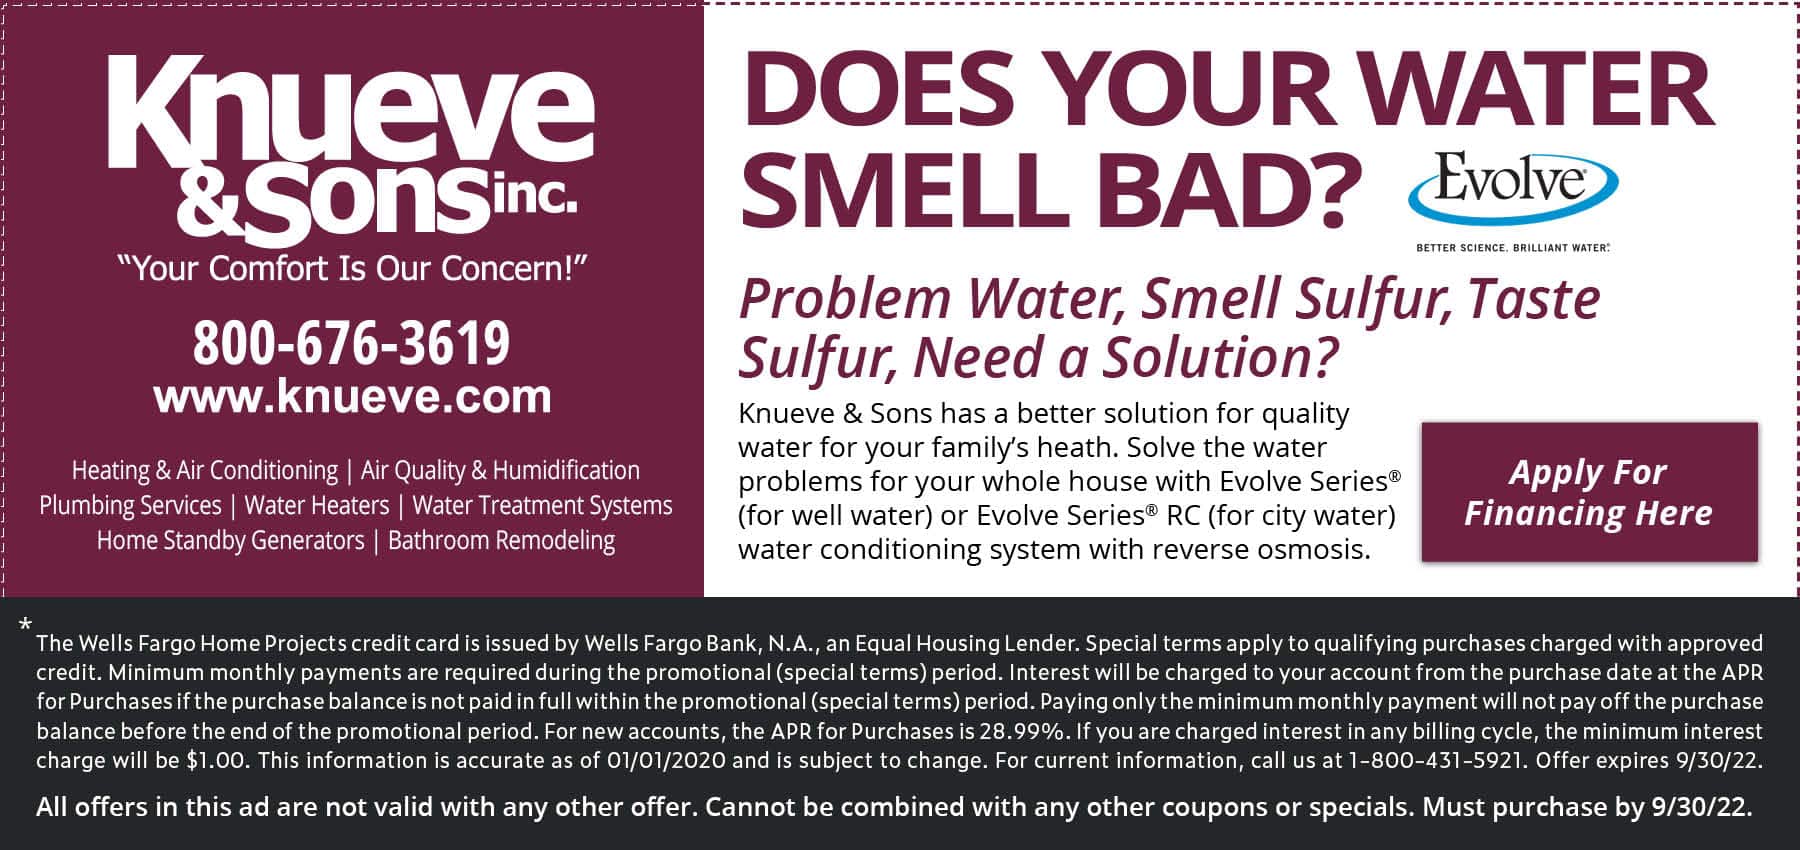 Does Your Water Smell Bad - Evolve special